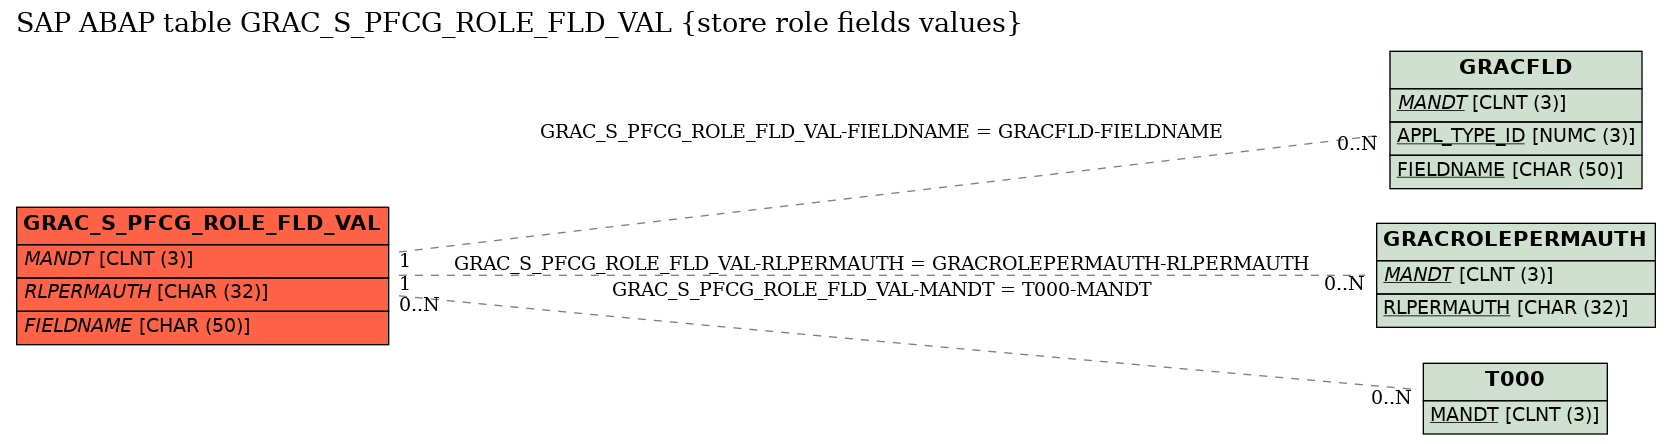 E-R Diagram for table GRAC_S_PFCG_ROLE_FLD_VAL (store role fields values)